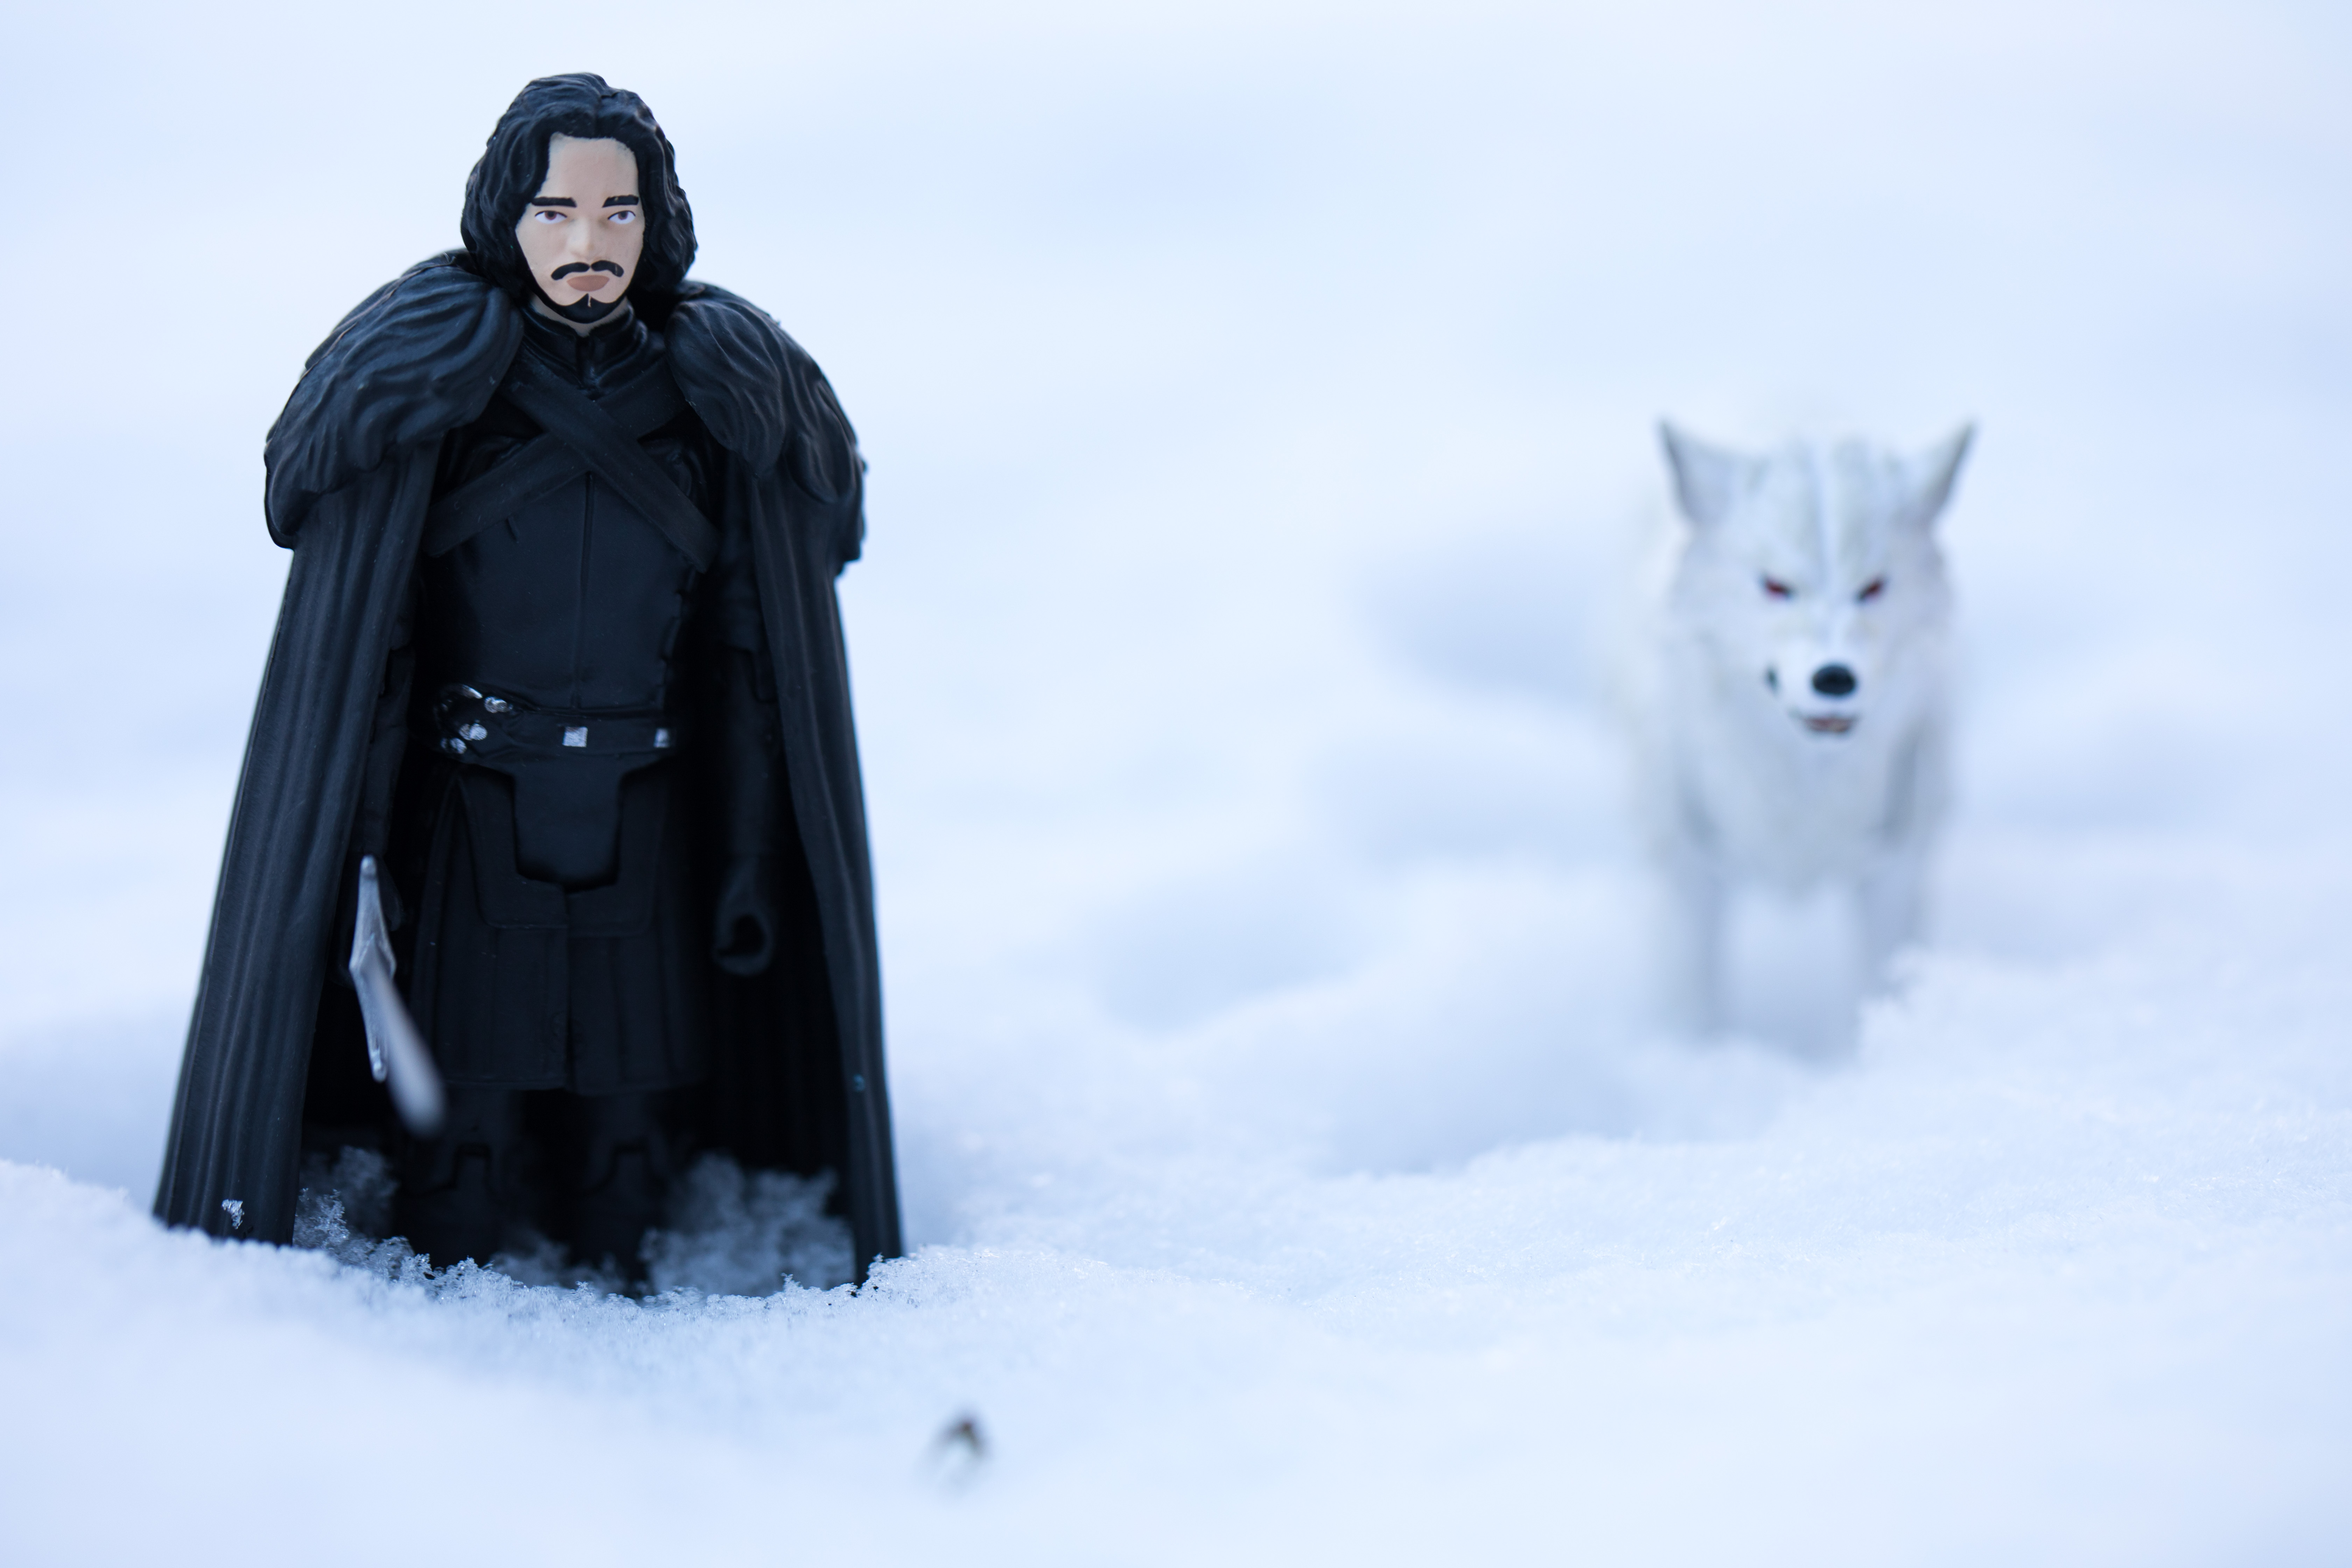 130+ 4K Jon Snow Wallpapers | Background Images